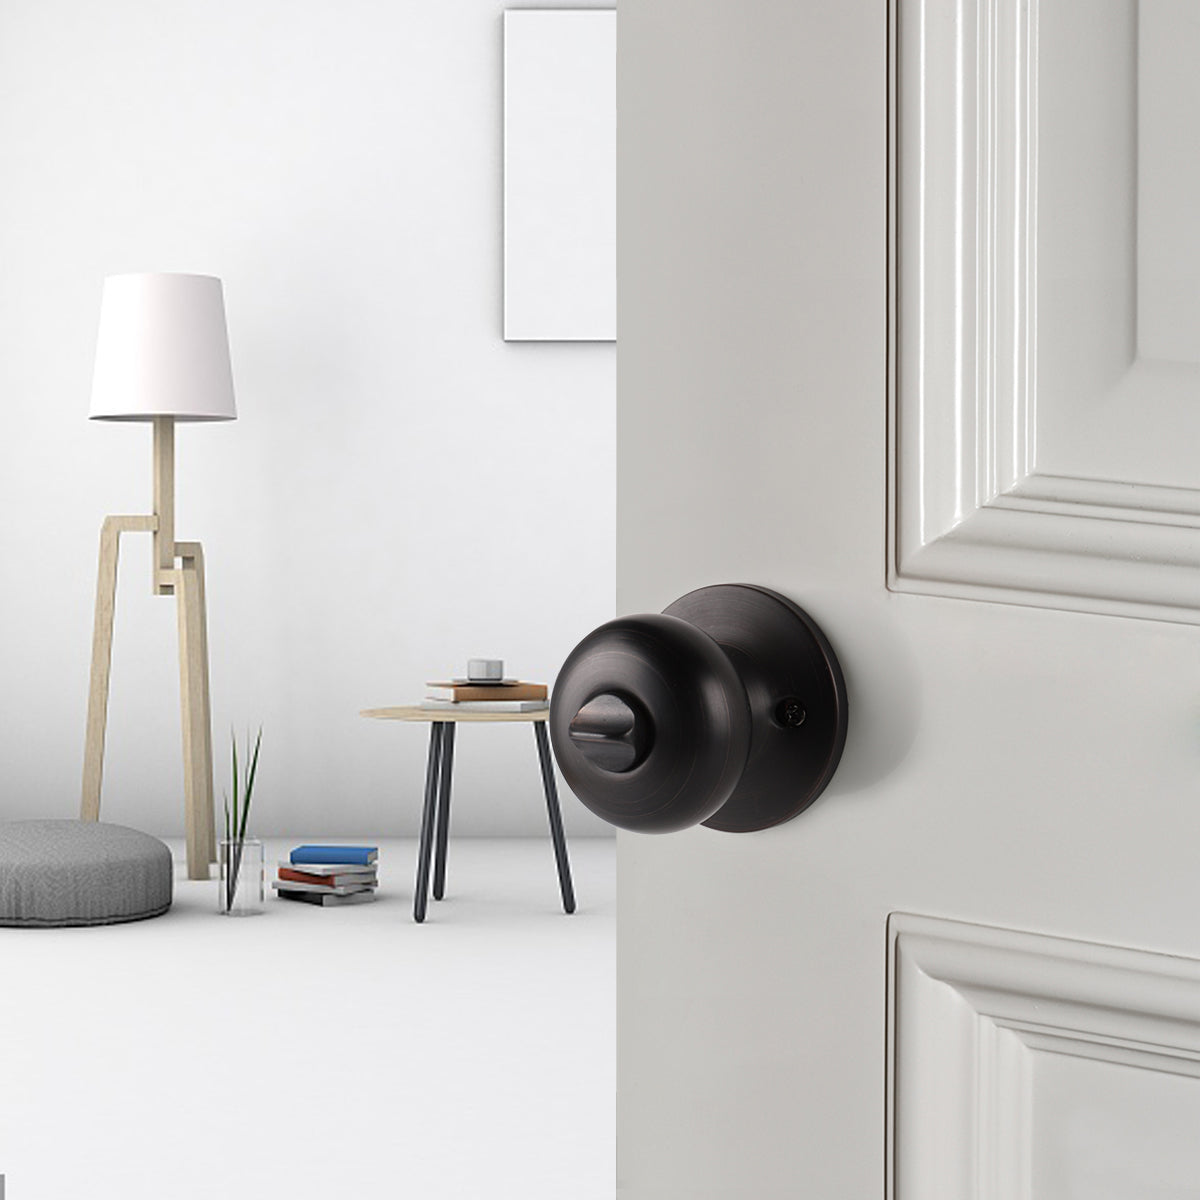 Single Connect Rod Flat Ball Knobs Privacy Door Lock Knob Oil Rubbed Bronze Finish DL5766ORBBK - Probrico